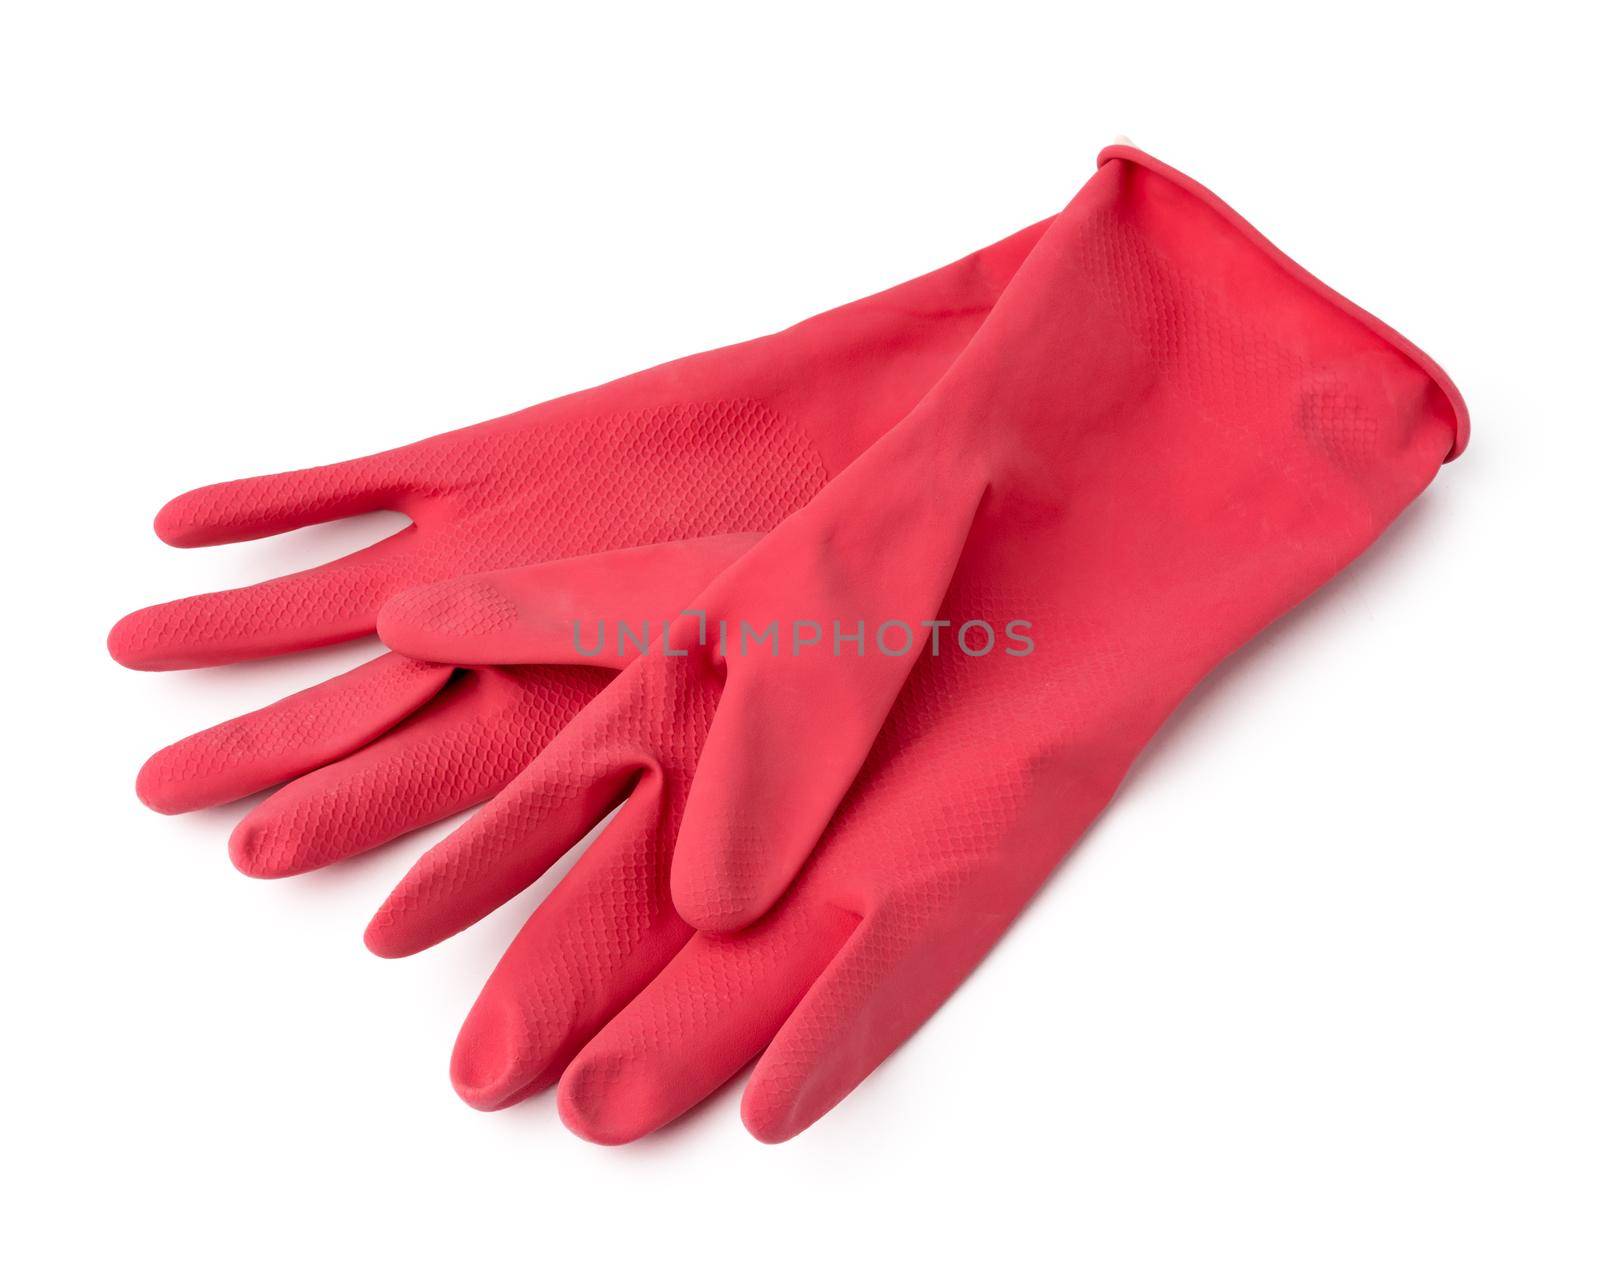 Latex protective gloves isolated on white background by Fabrikasimf